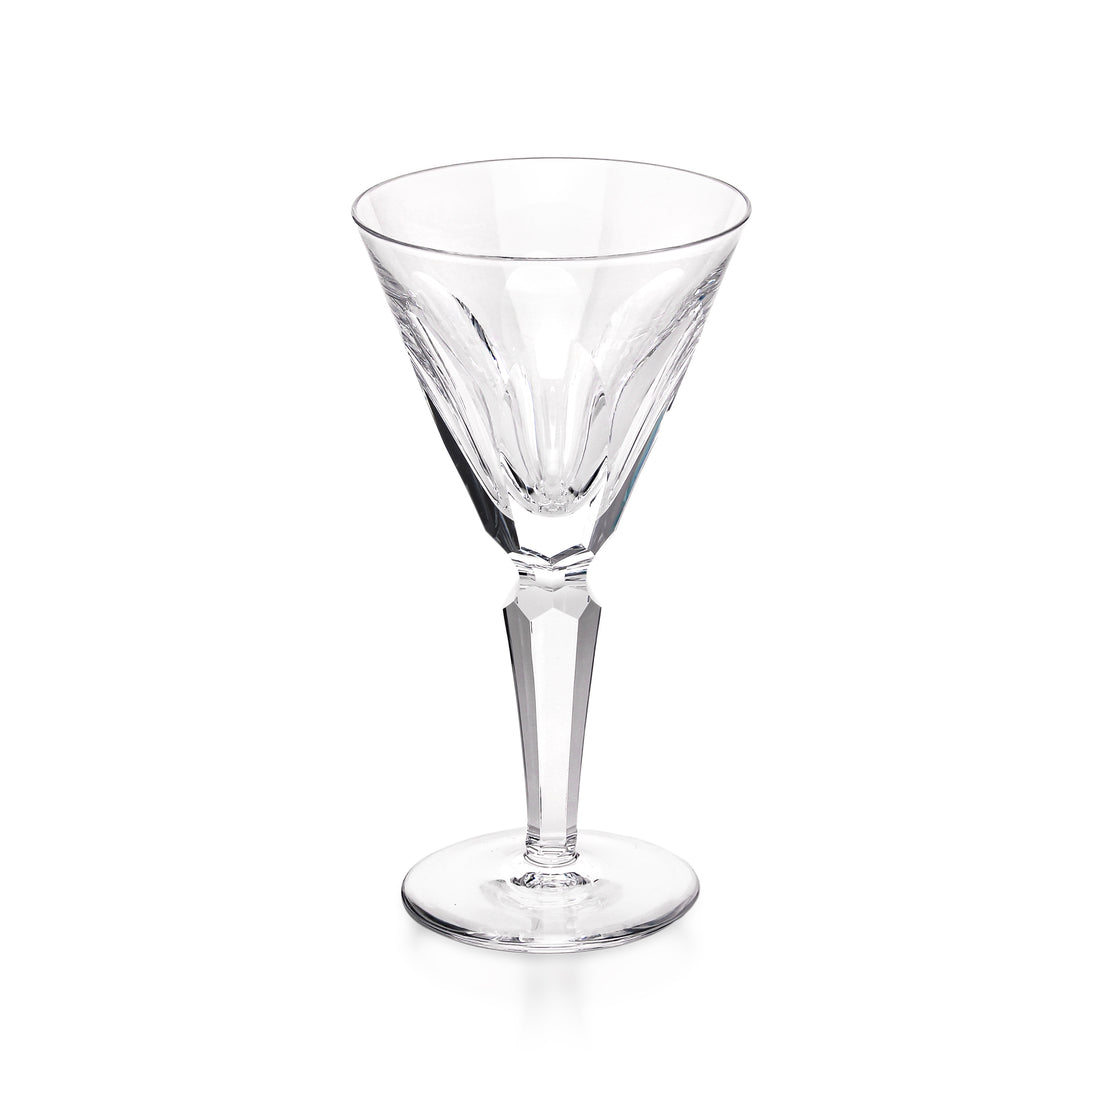 WATERFORD Sheila Claret Wine Glasses - Set of 8